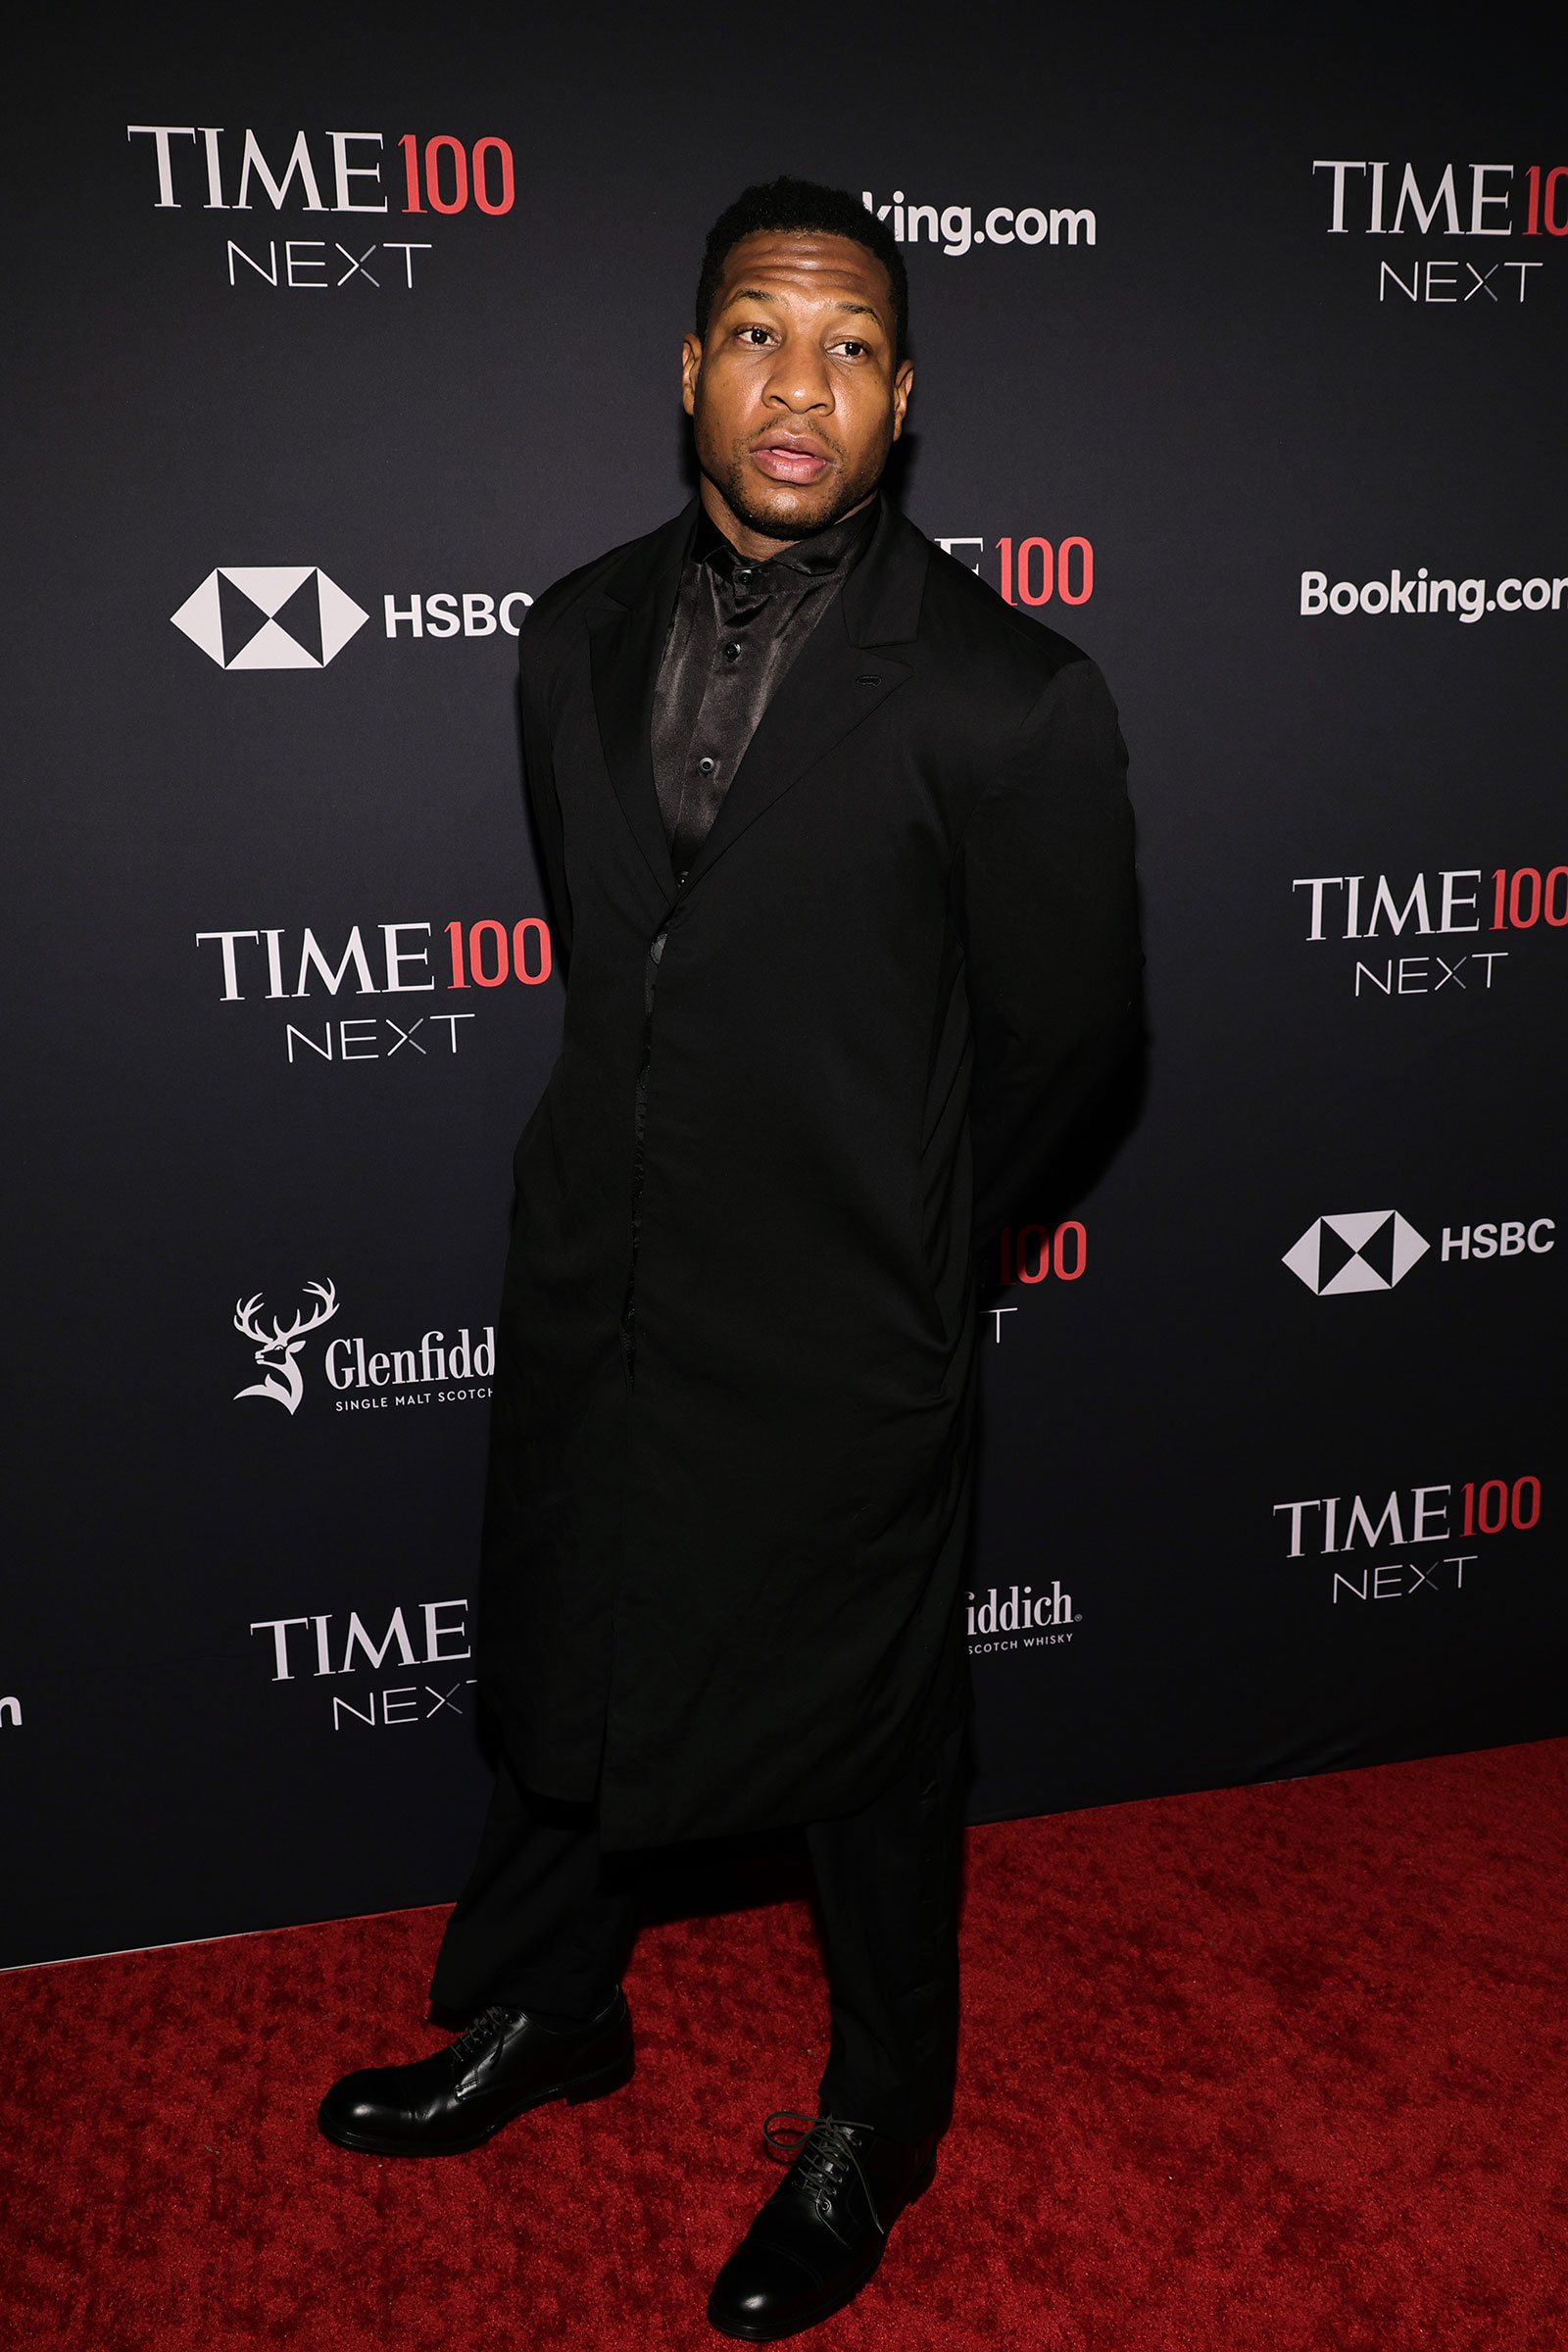 Actor Jonathan Majors attends the TIME100 Next Gala in New York City on Oct. 25, 2022. (Jamie McCarthy—Getty Images)